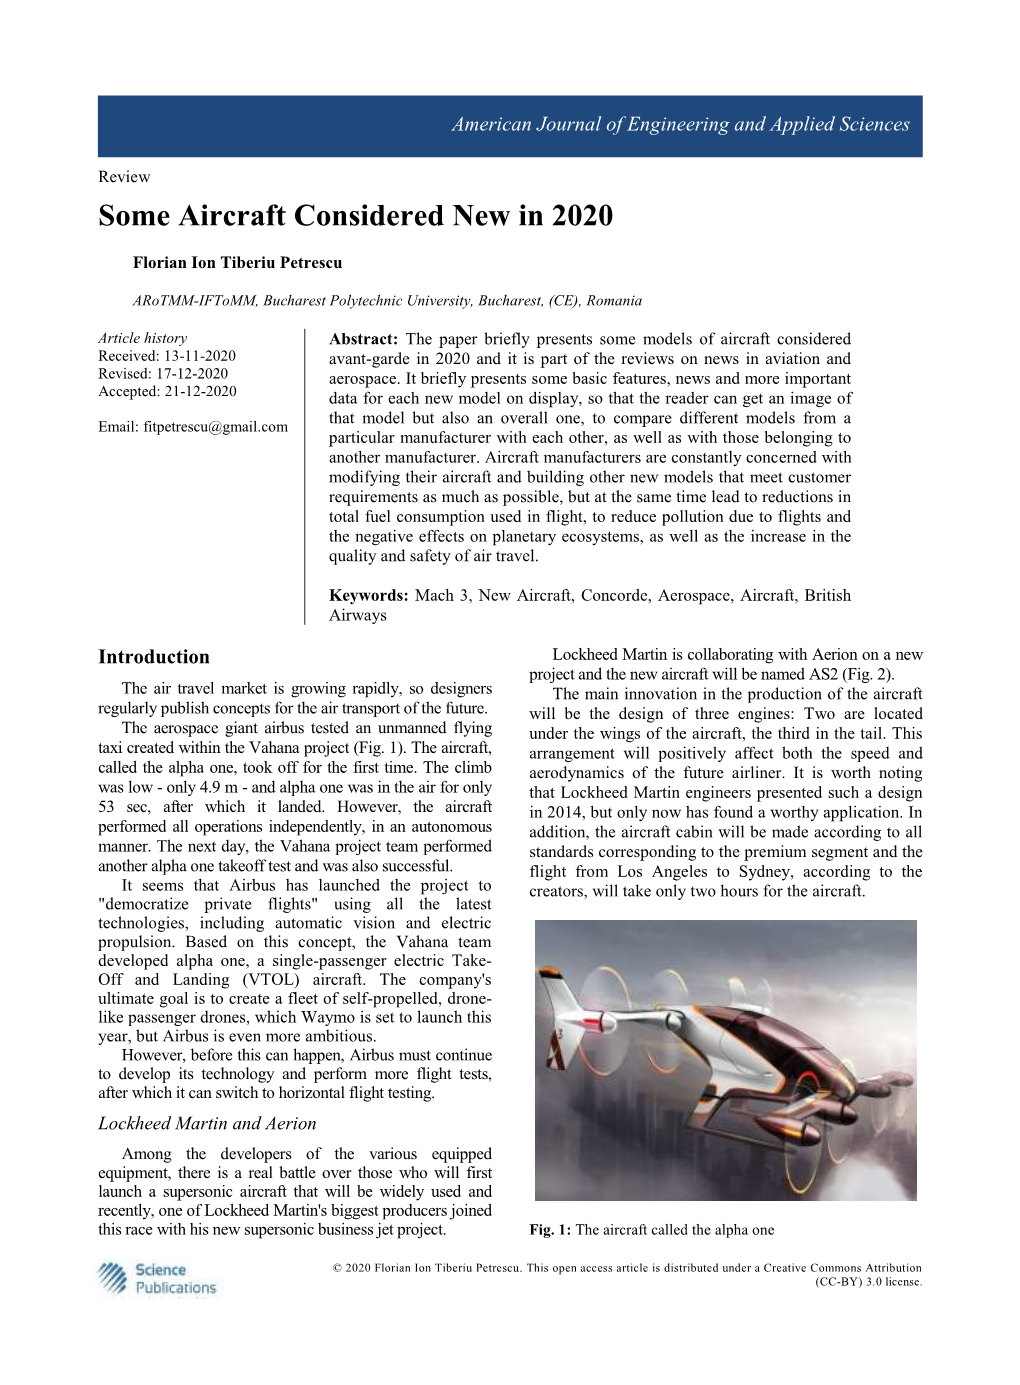 Some Aircraft Considered New in 2020